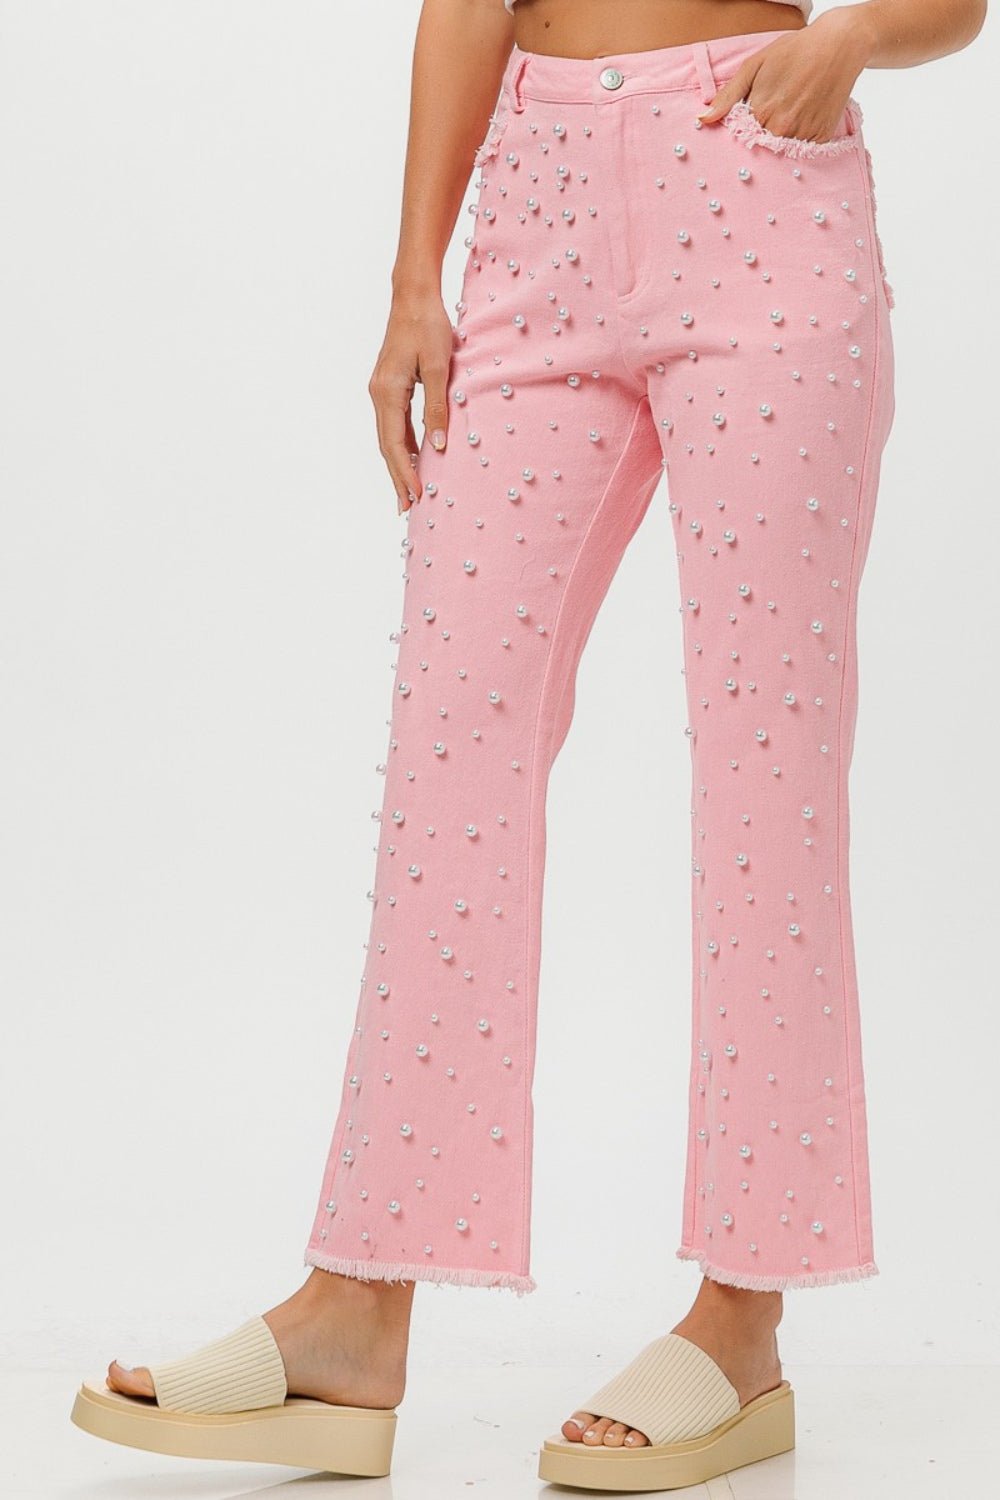 Washed Cotton Pearl Embellished Jeans in Blush PinkJeansBiBi